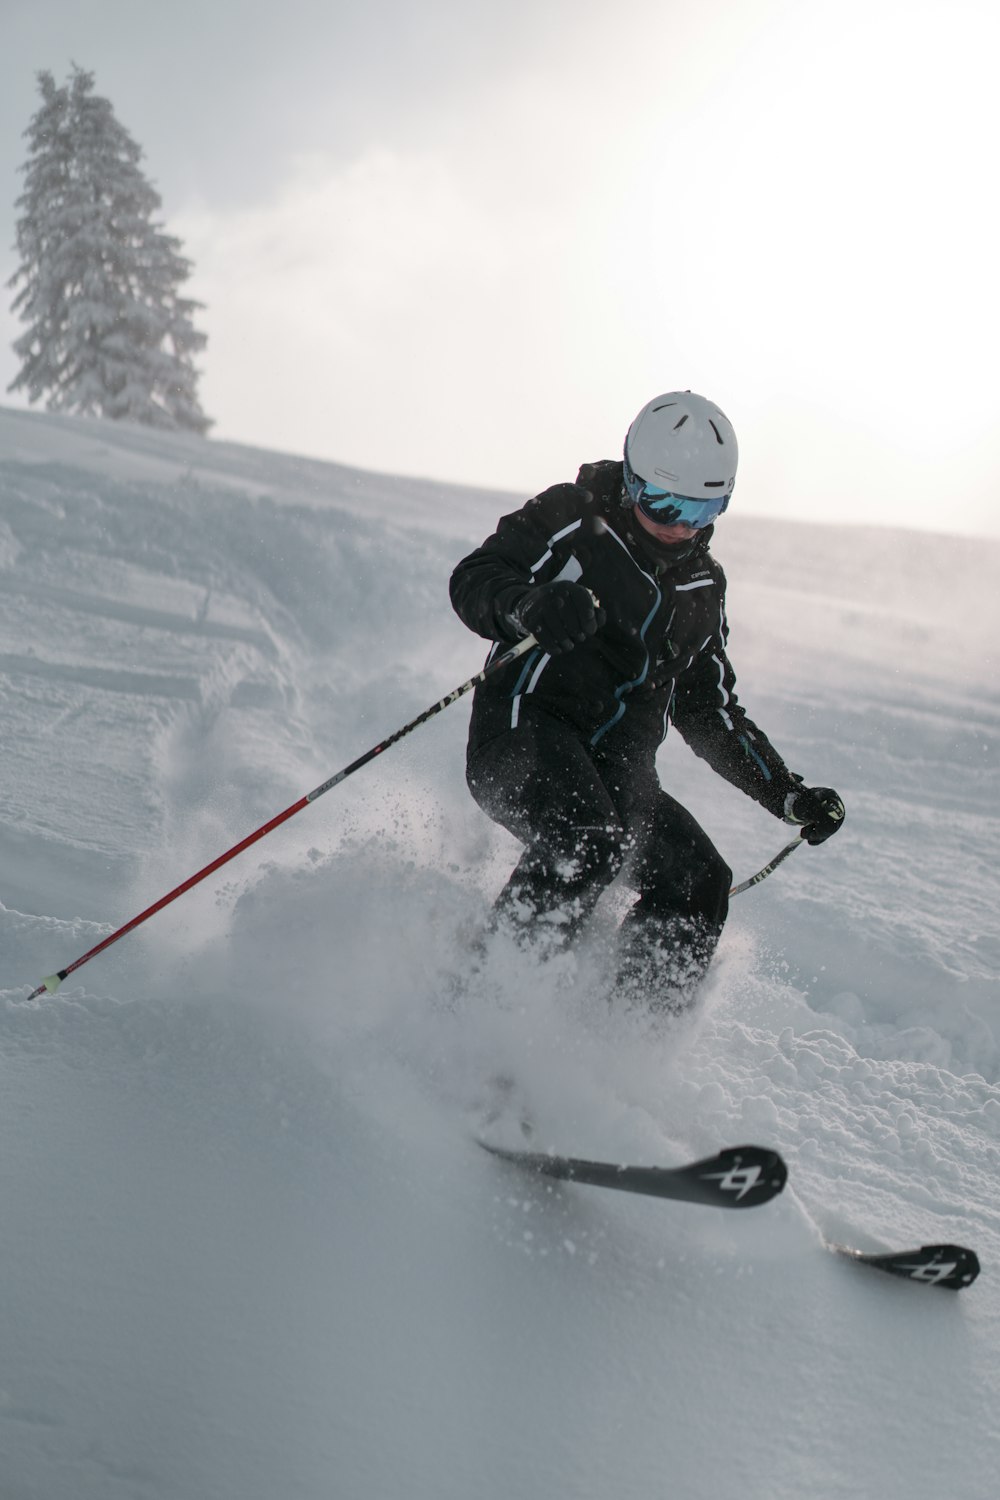 person in black jacket and black pants riding on ski blades on snow covered ground during